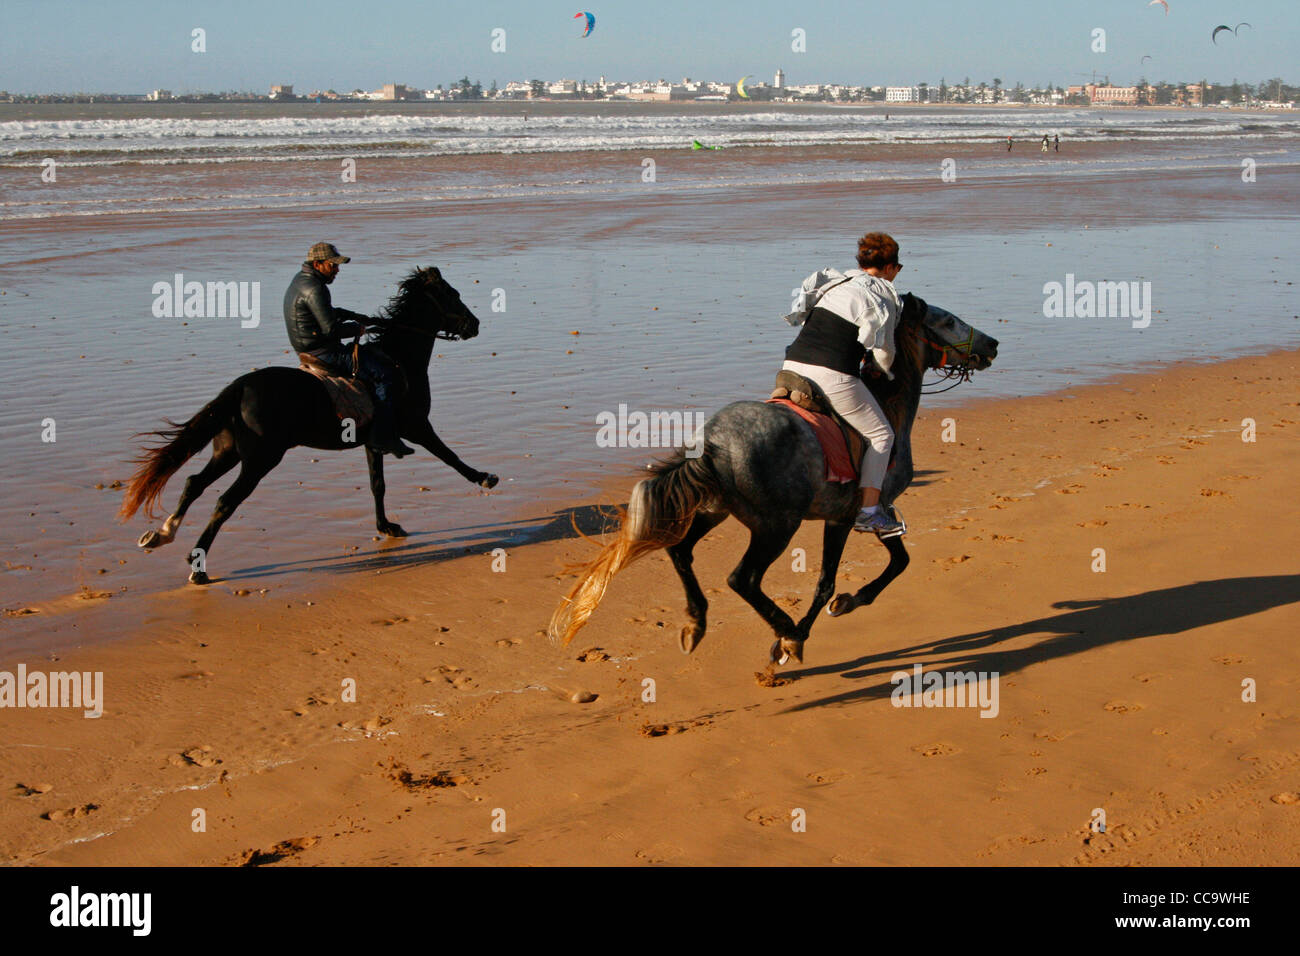 Gallop on the beach. Stock Photo